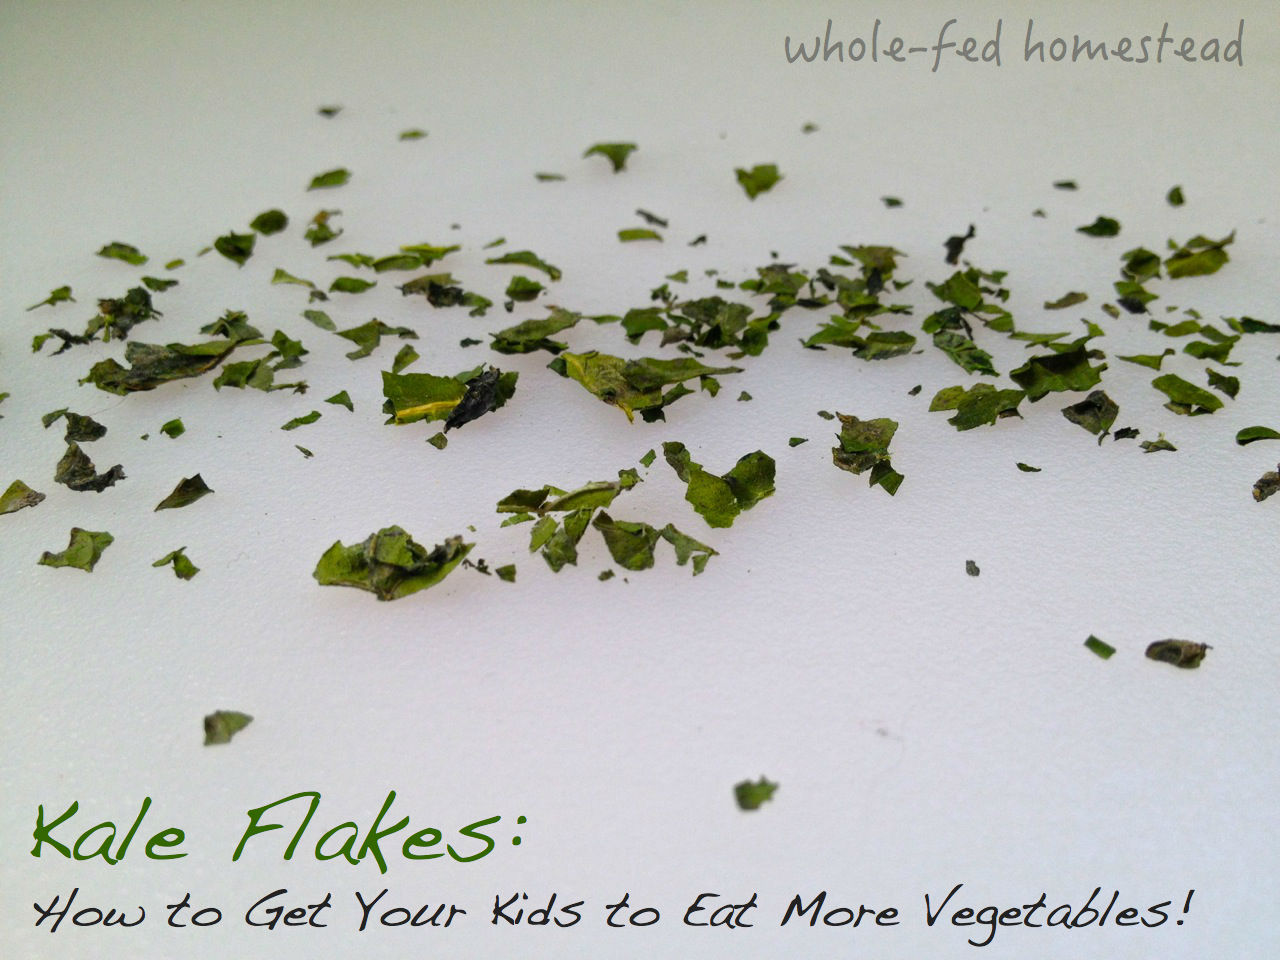 Kale Flakes…or, How to Get Your Kids to Eat More Vegetables using “Green Sprinkles”